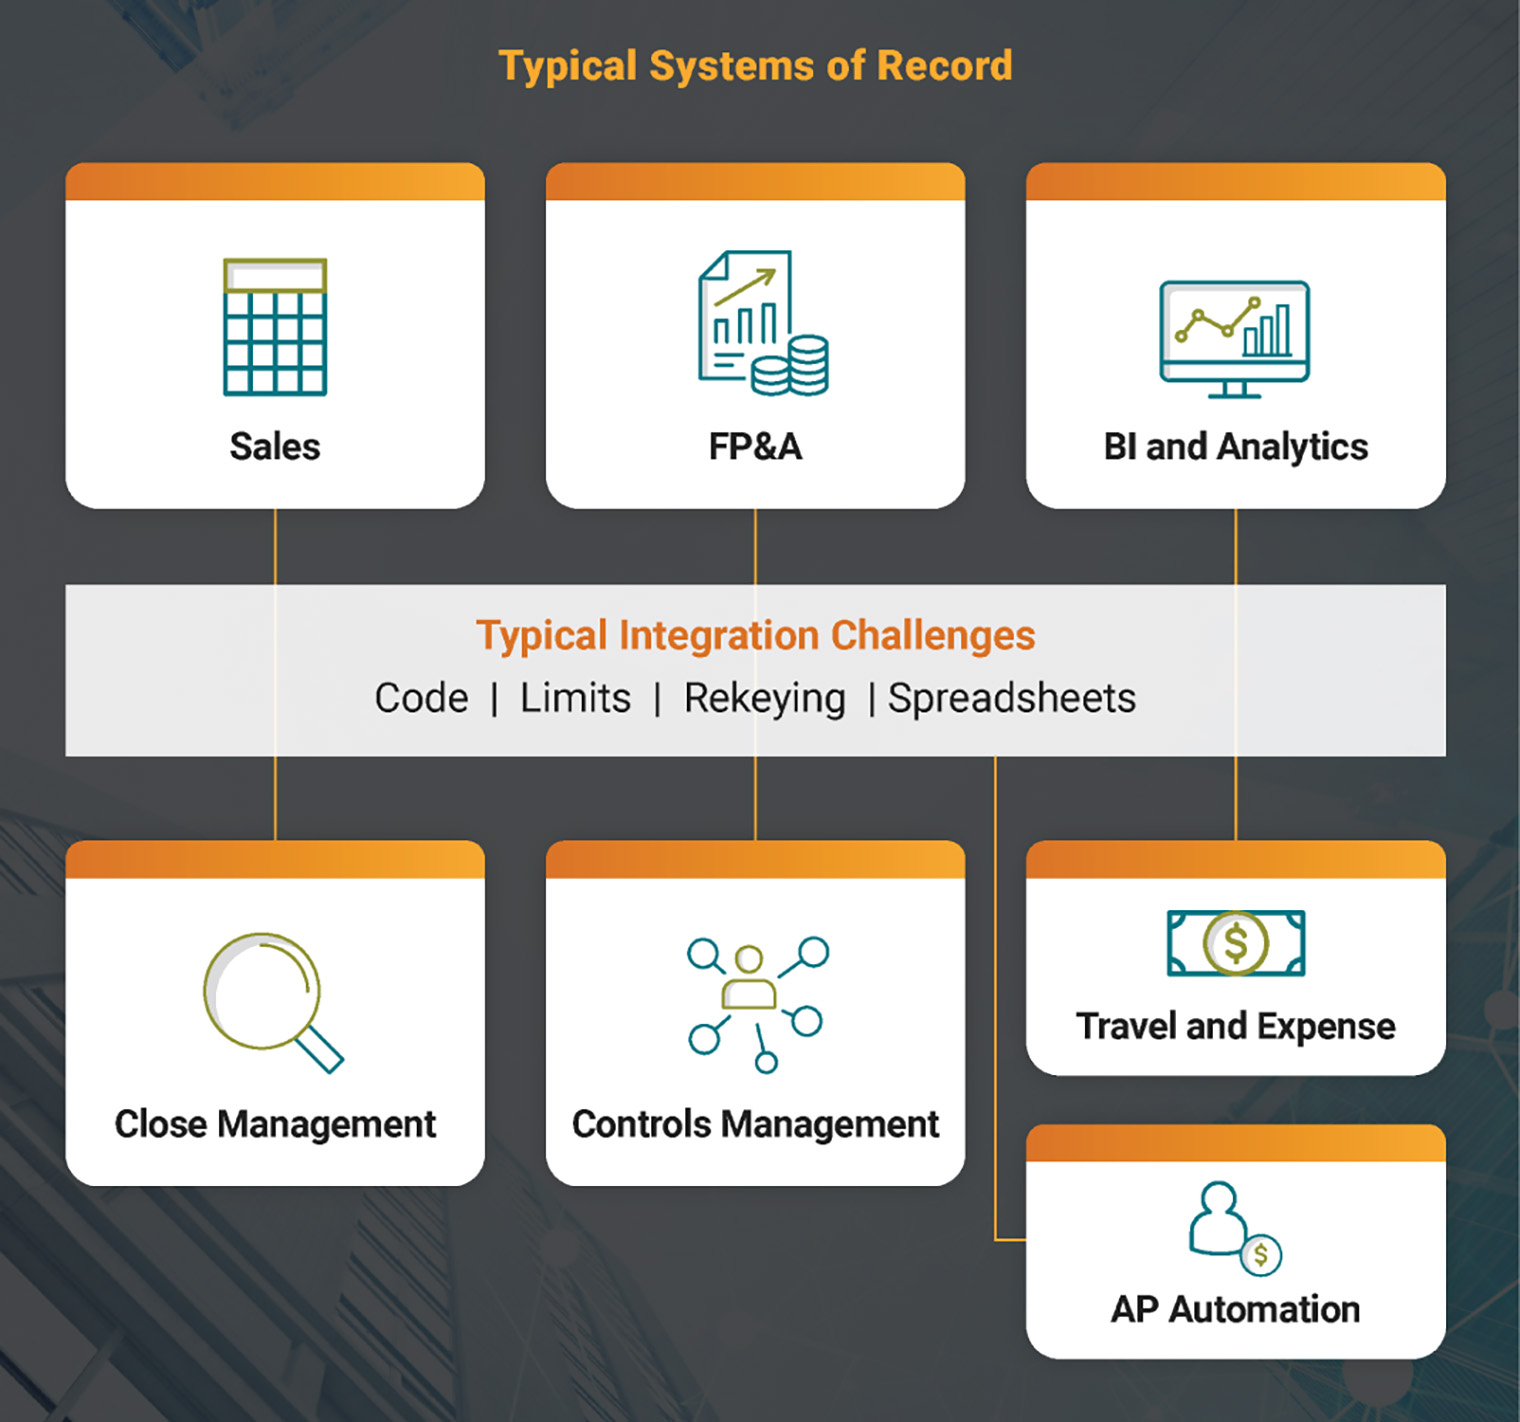 Building your Finance Technology Roadmap - Typical Systems of Record